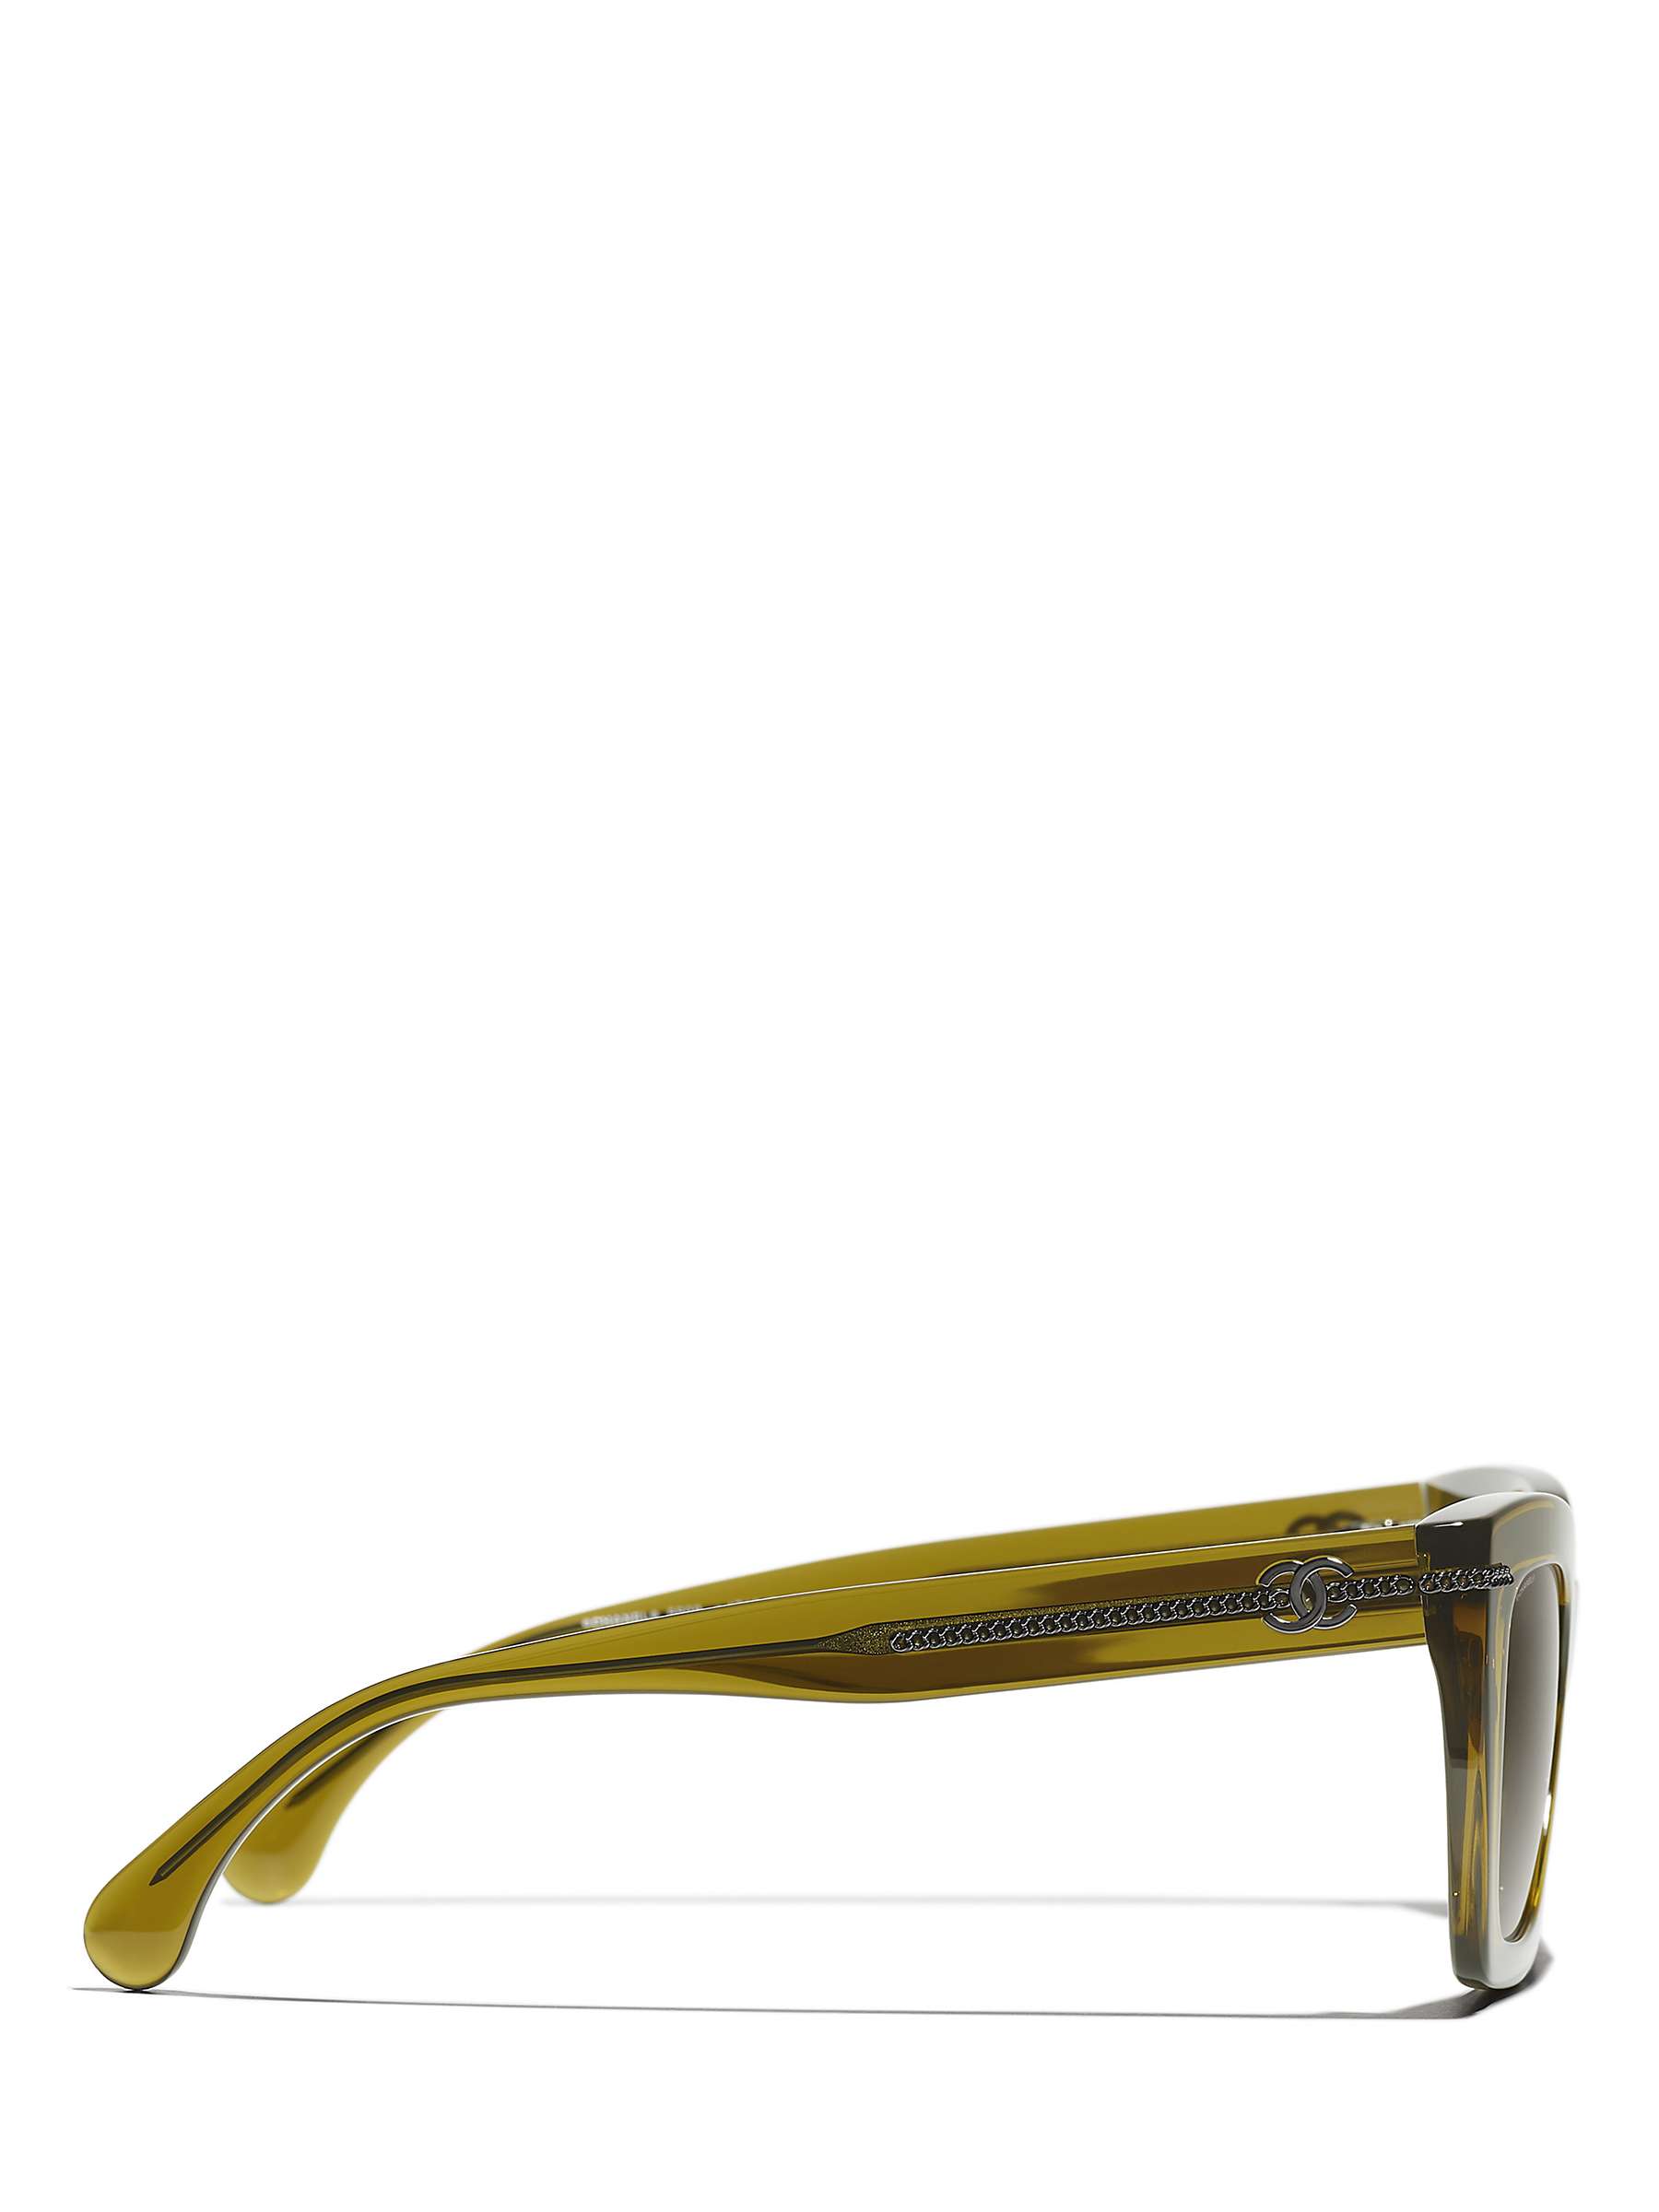 Buy CHANEL Rectangular Sunglasses CH5509, Olive/Brown Online at johnlewis.com